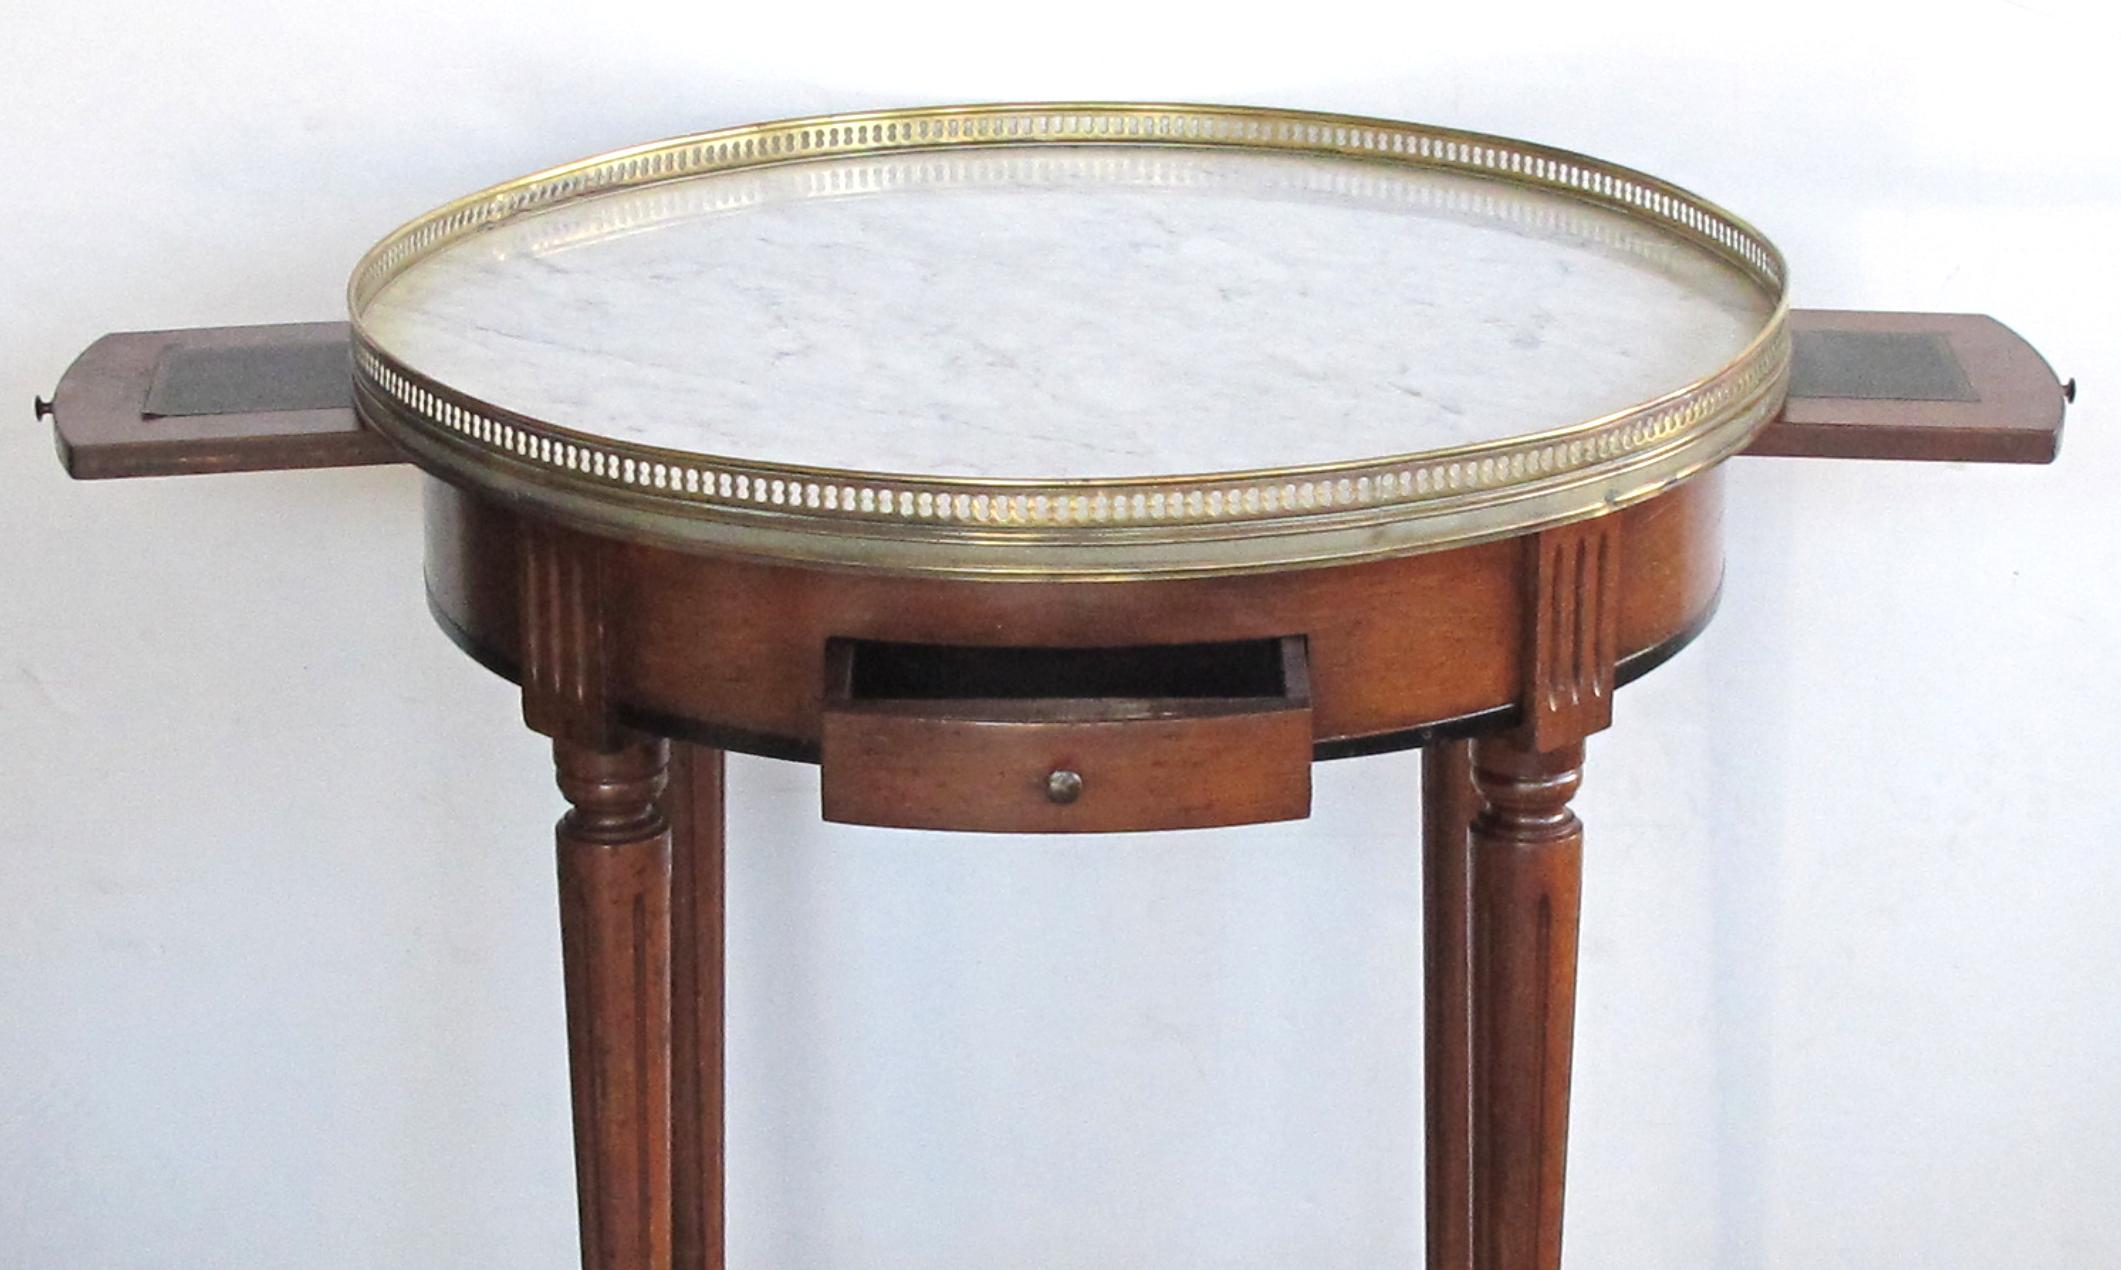 Early 20th Century French Louis XVI Style Fruitwood Circular Side Table with Carrara Marble Top